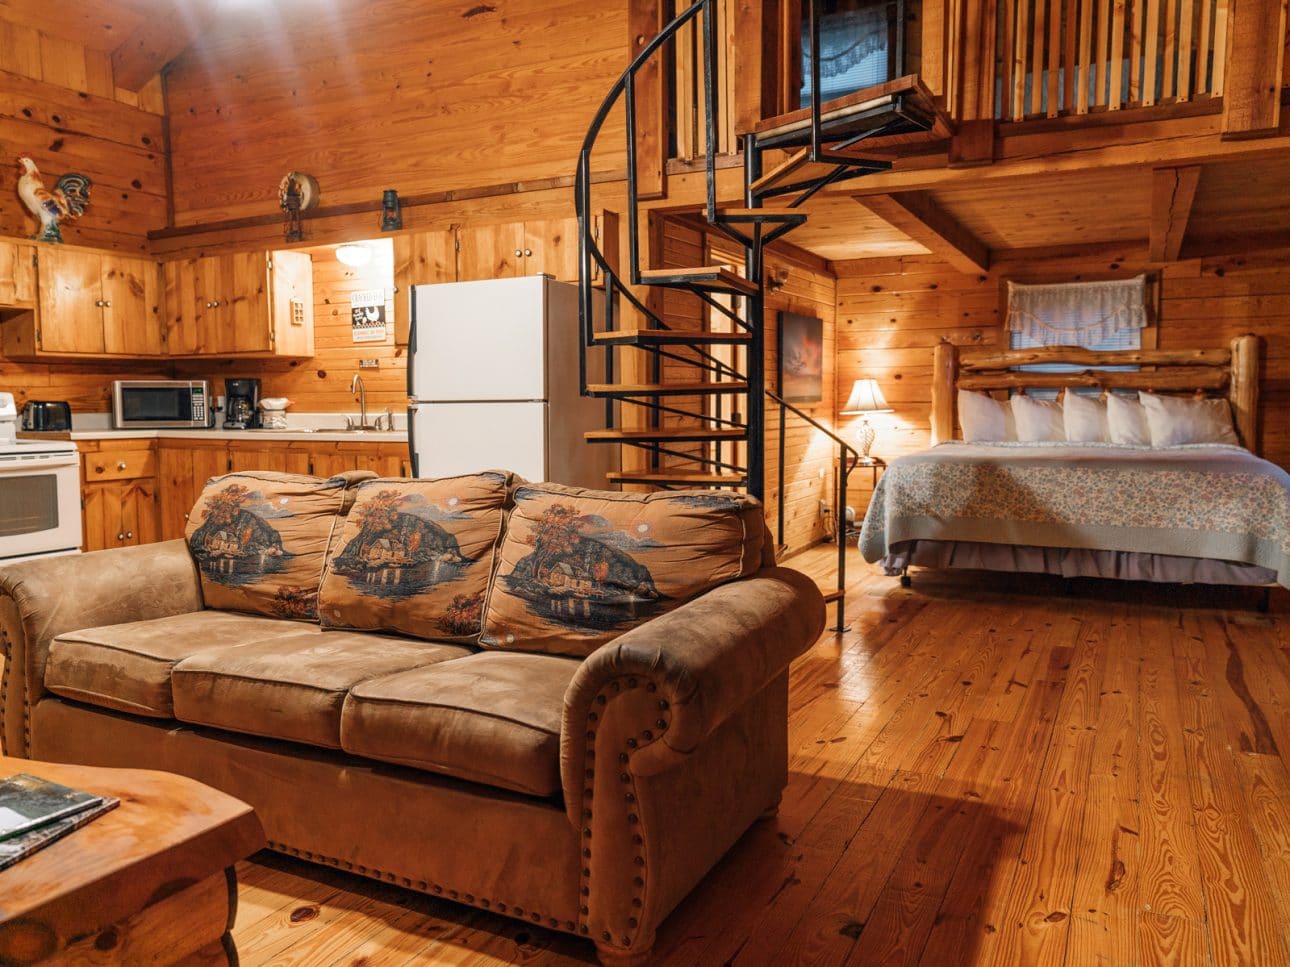 The main floor of the Mountain Magic Cabin features a spacious setting for relaxation with family, friends or just two!